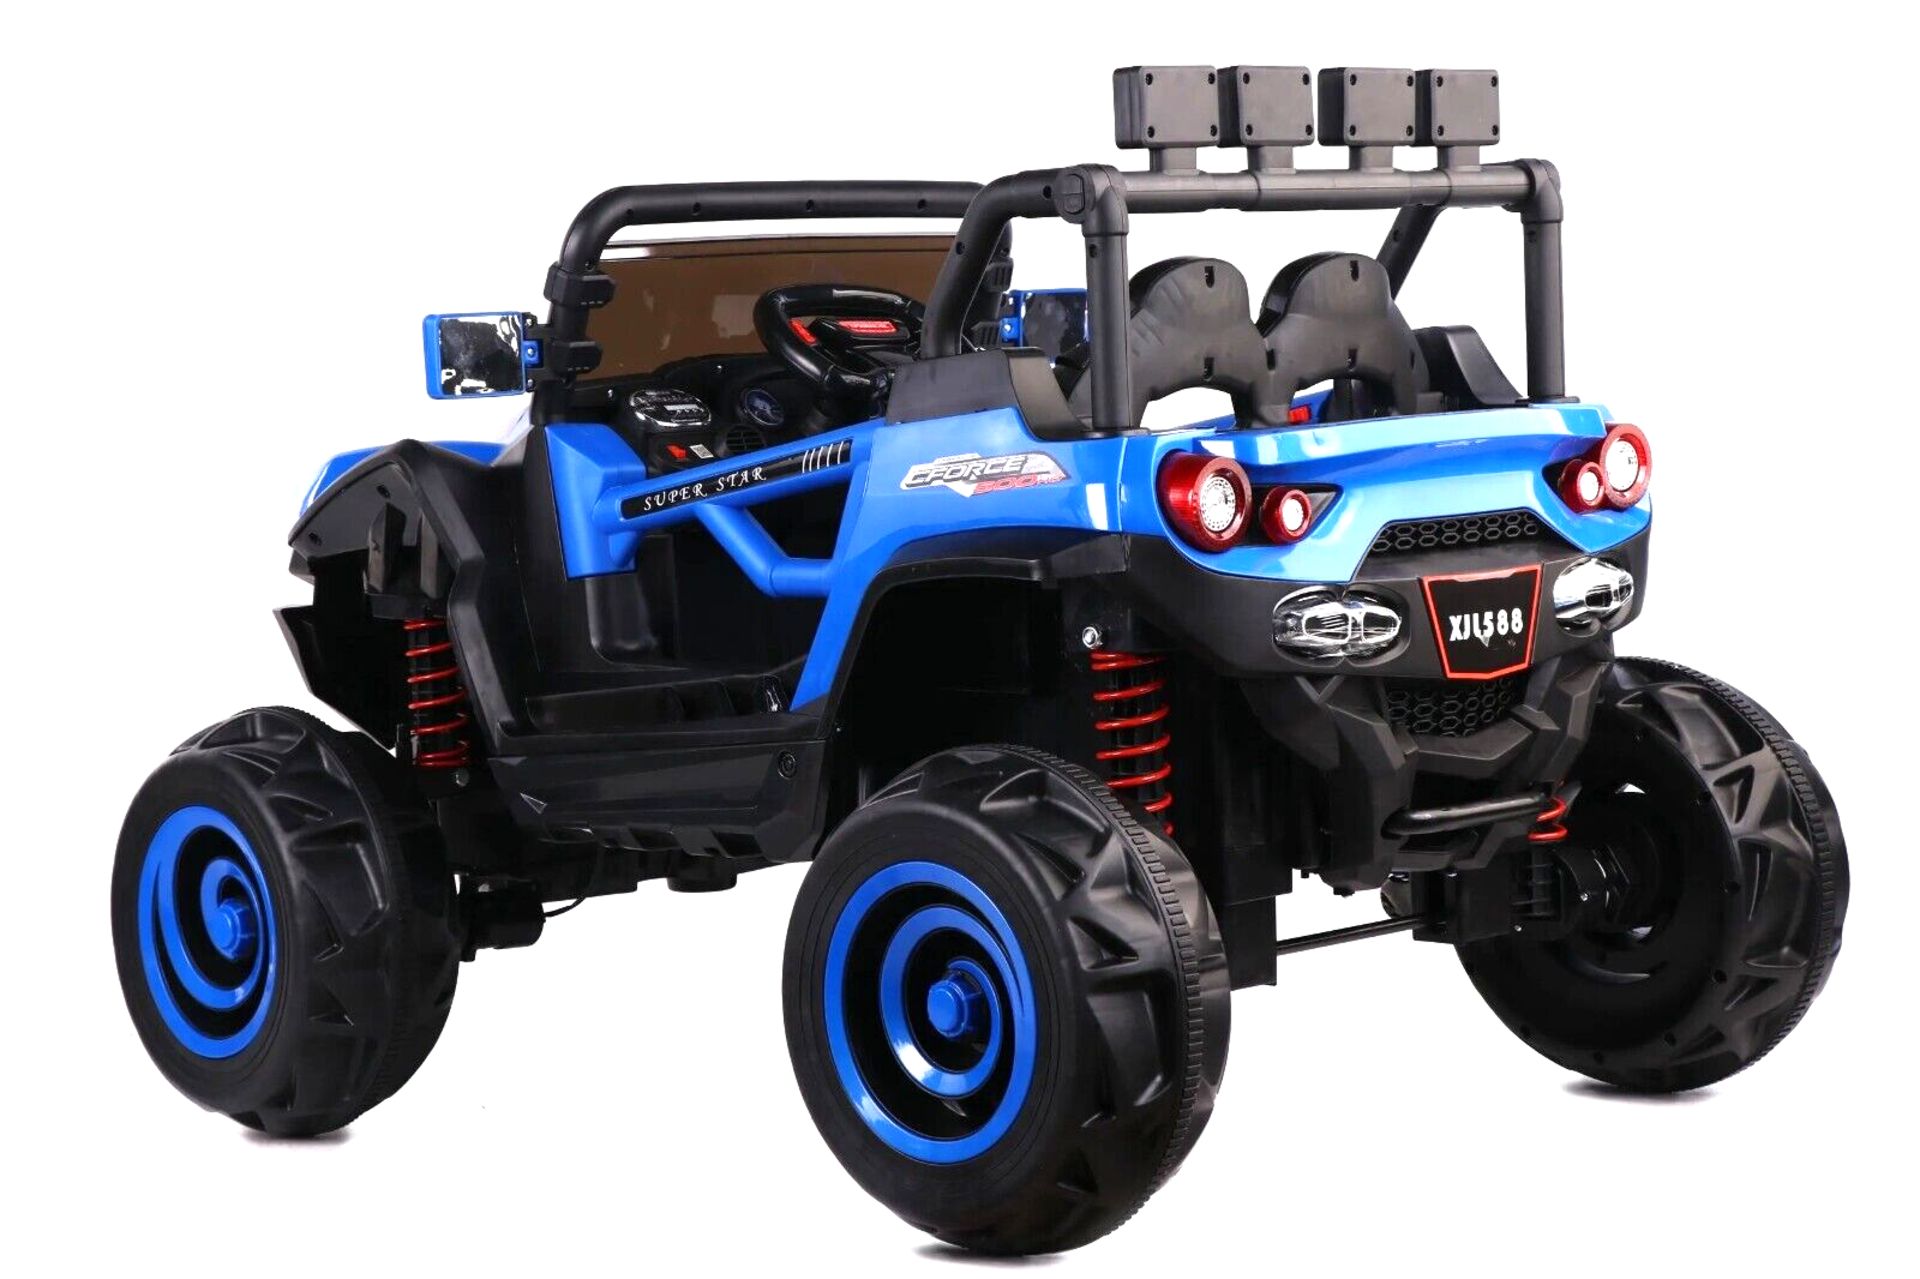 BLUE 4X4 ATV/UTV KIDS BUGGY JEEP ELECTRIC CAR WITH REMOTE BRAND NEW BOXED - Image 4 of 4